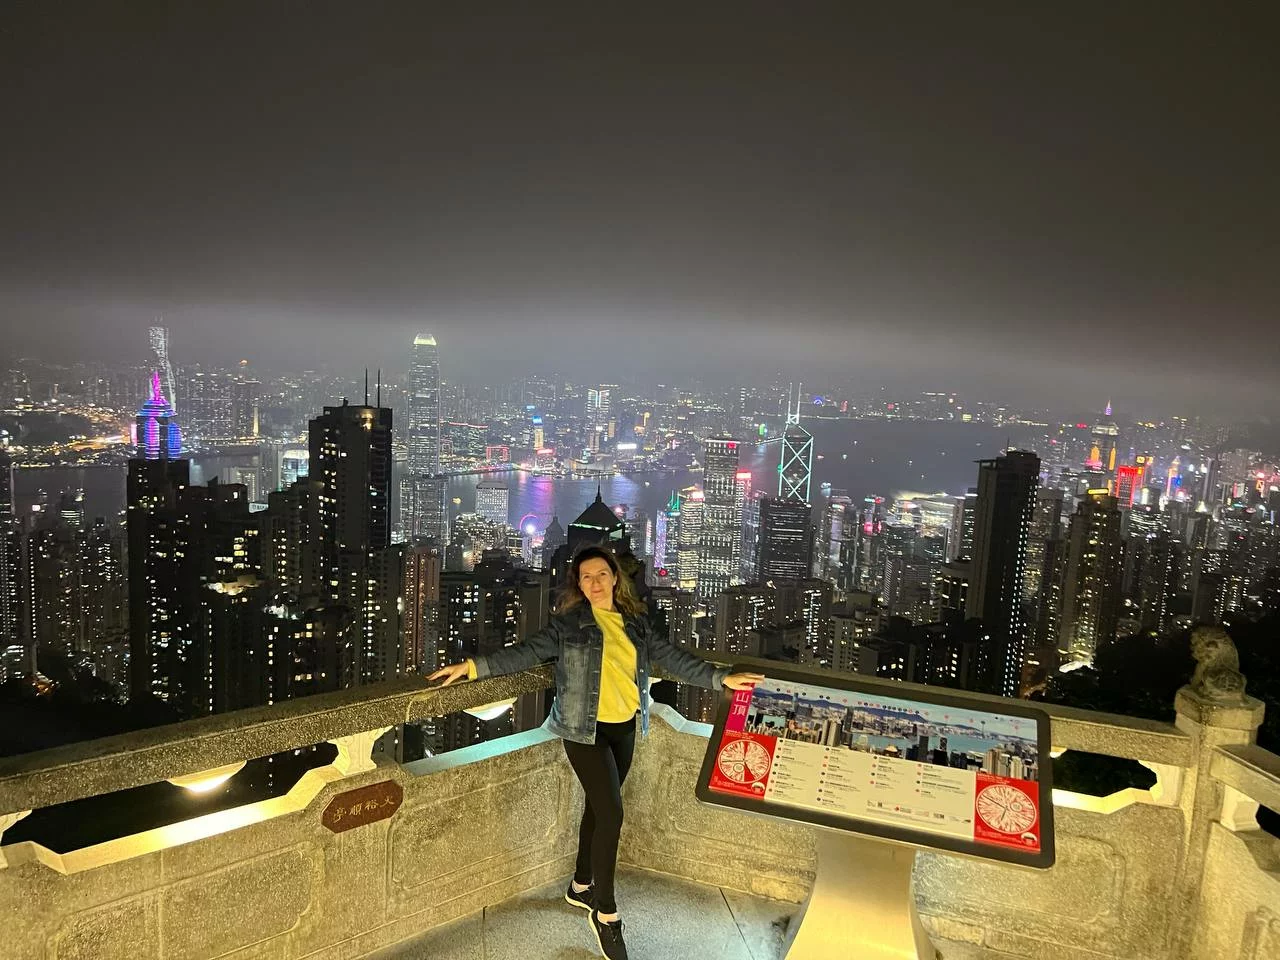 A woman on an observation deck in Hong Kong, night view from above